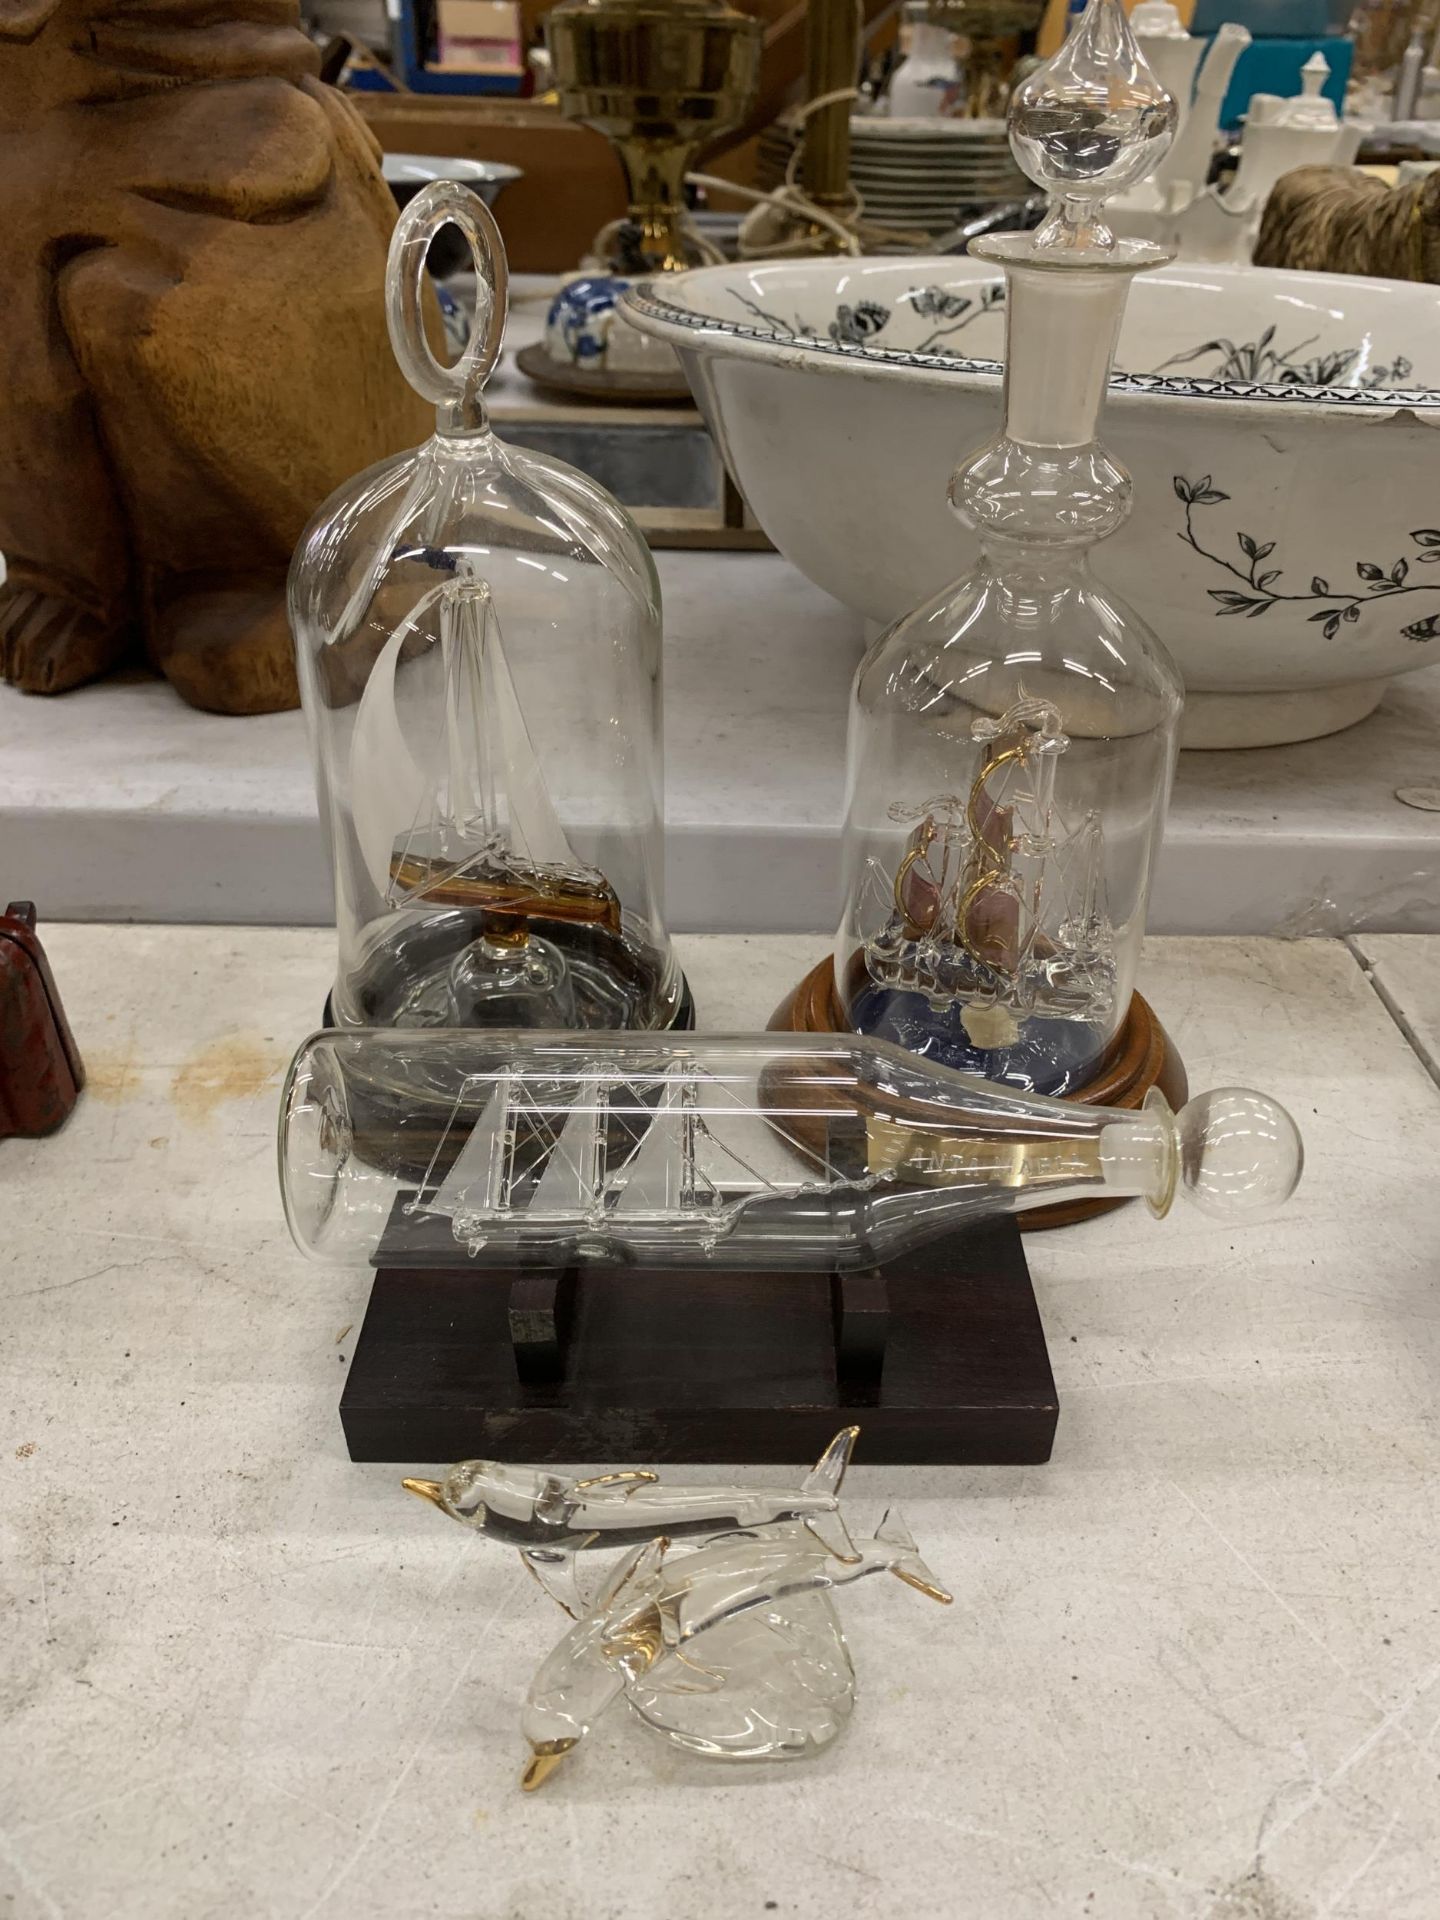 THREE GLASS SHIPS IN BOTTLES ON WOODEN BASES PLUS A GLASS DOLPHIN FIGURE